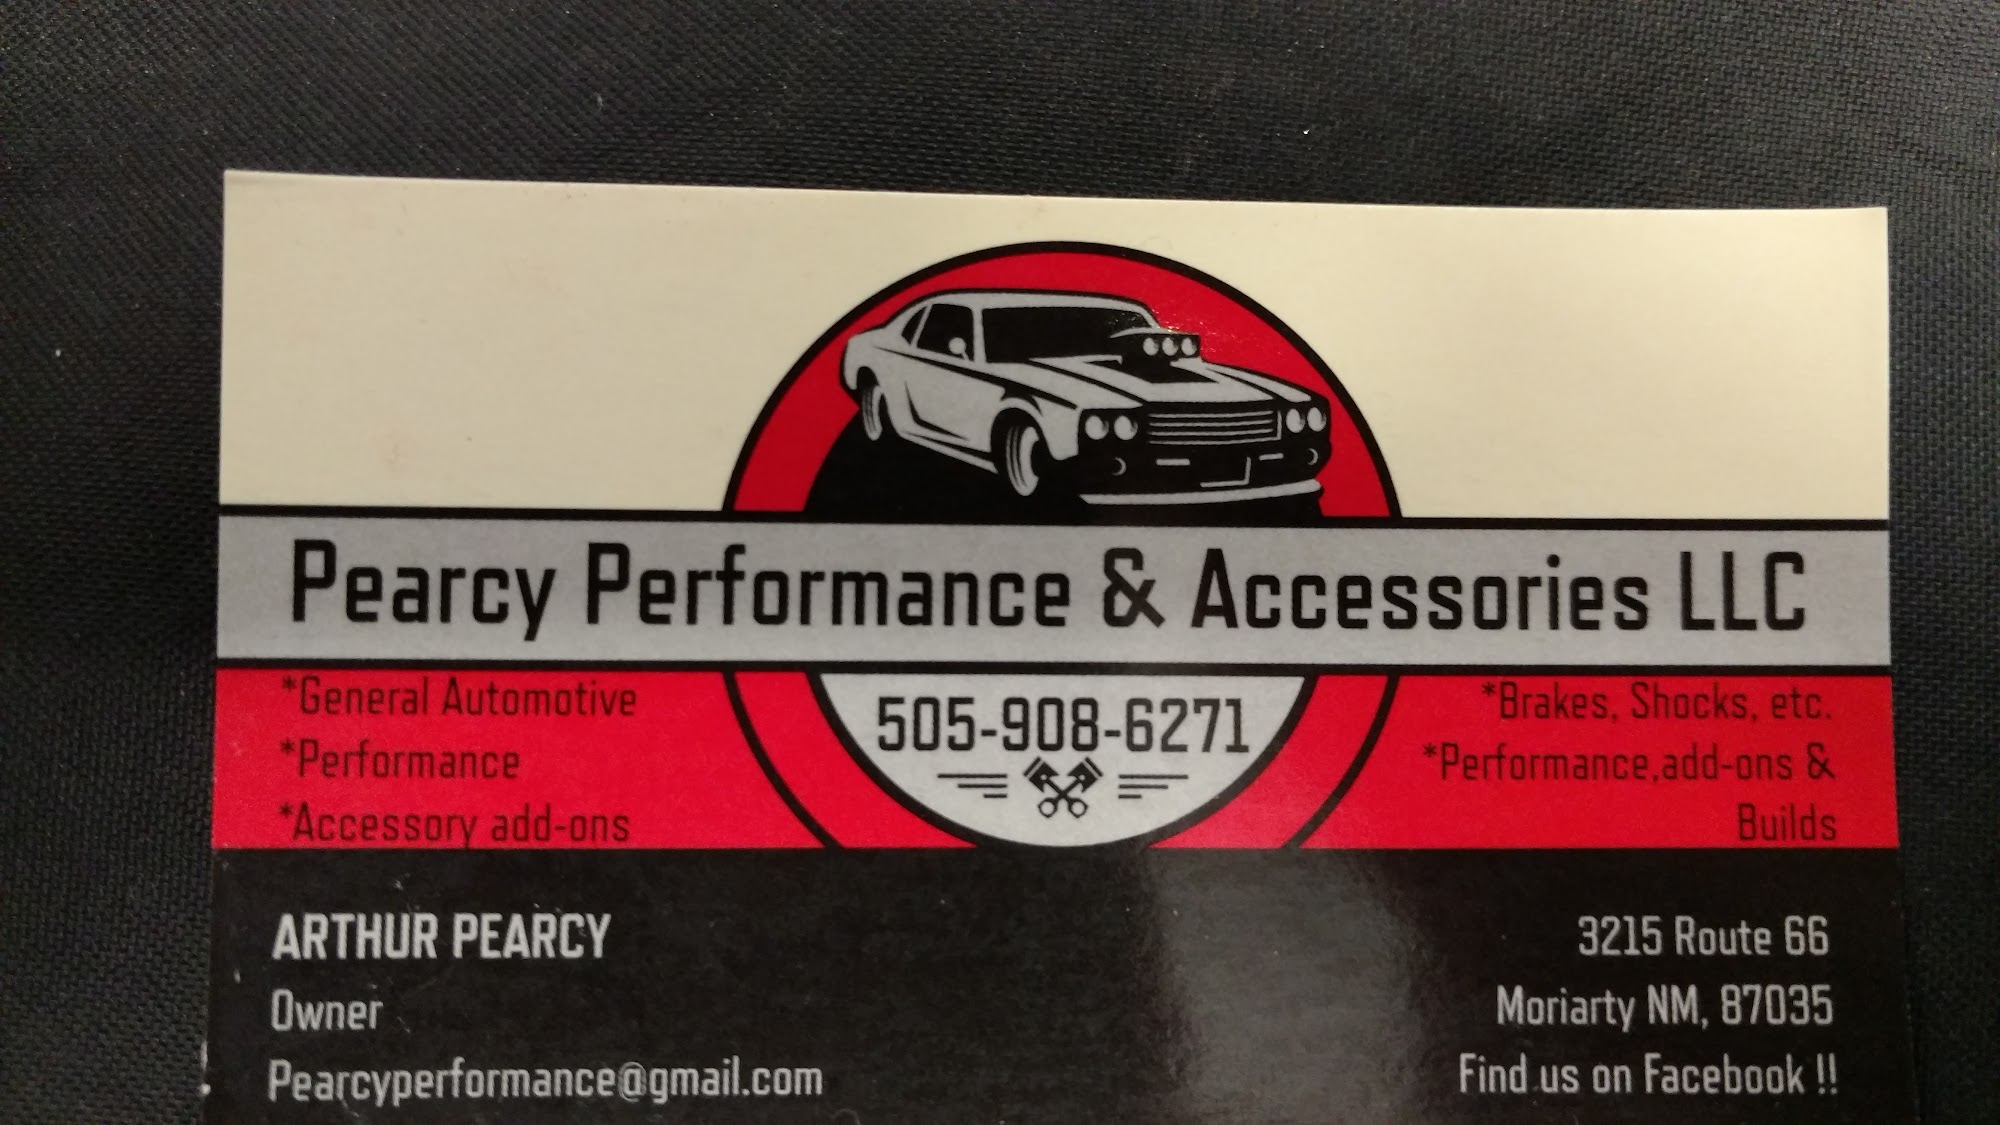 Pearcy Performance & Accessories llc